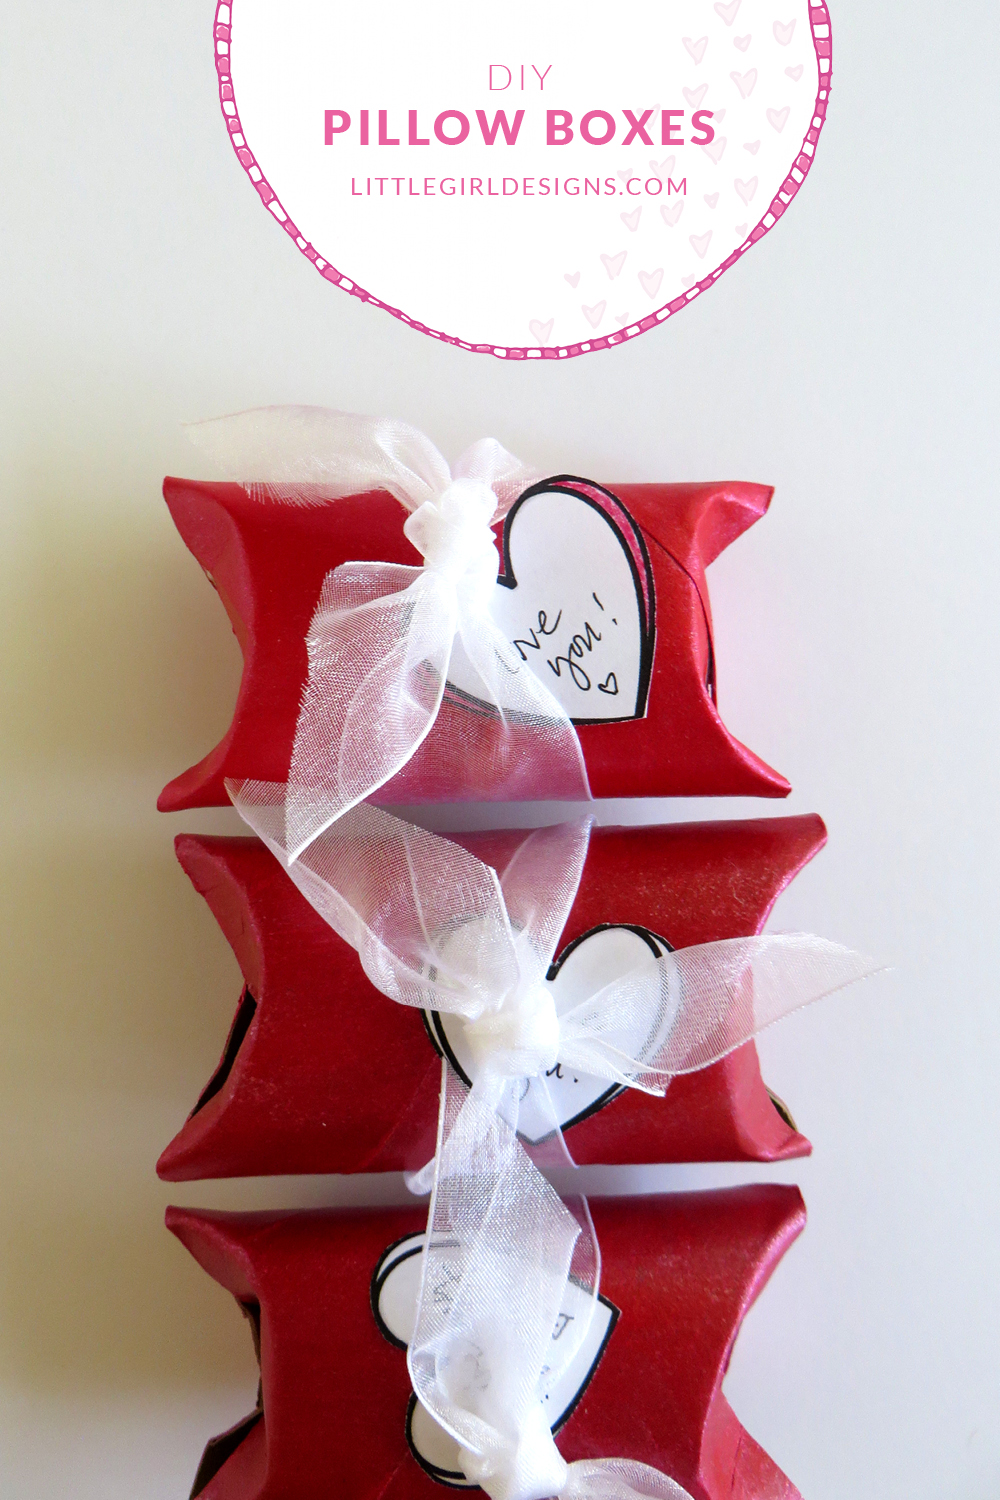 How to make sweet little pillow boxes out of toilet paper rolls to hold tiny treasures and candy for Valentine's Day, birthdays, Mother's Day, Christmas...you name it! @littlegirldesigns.com.